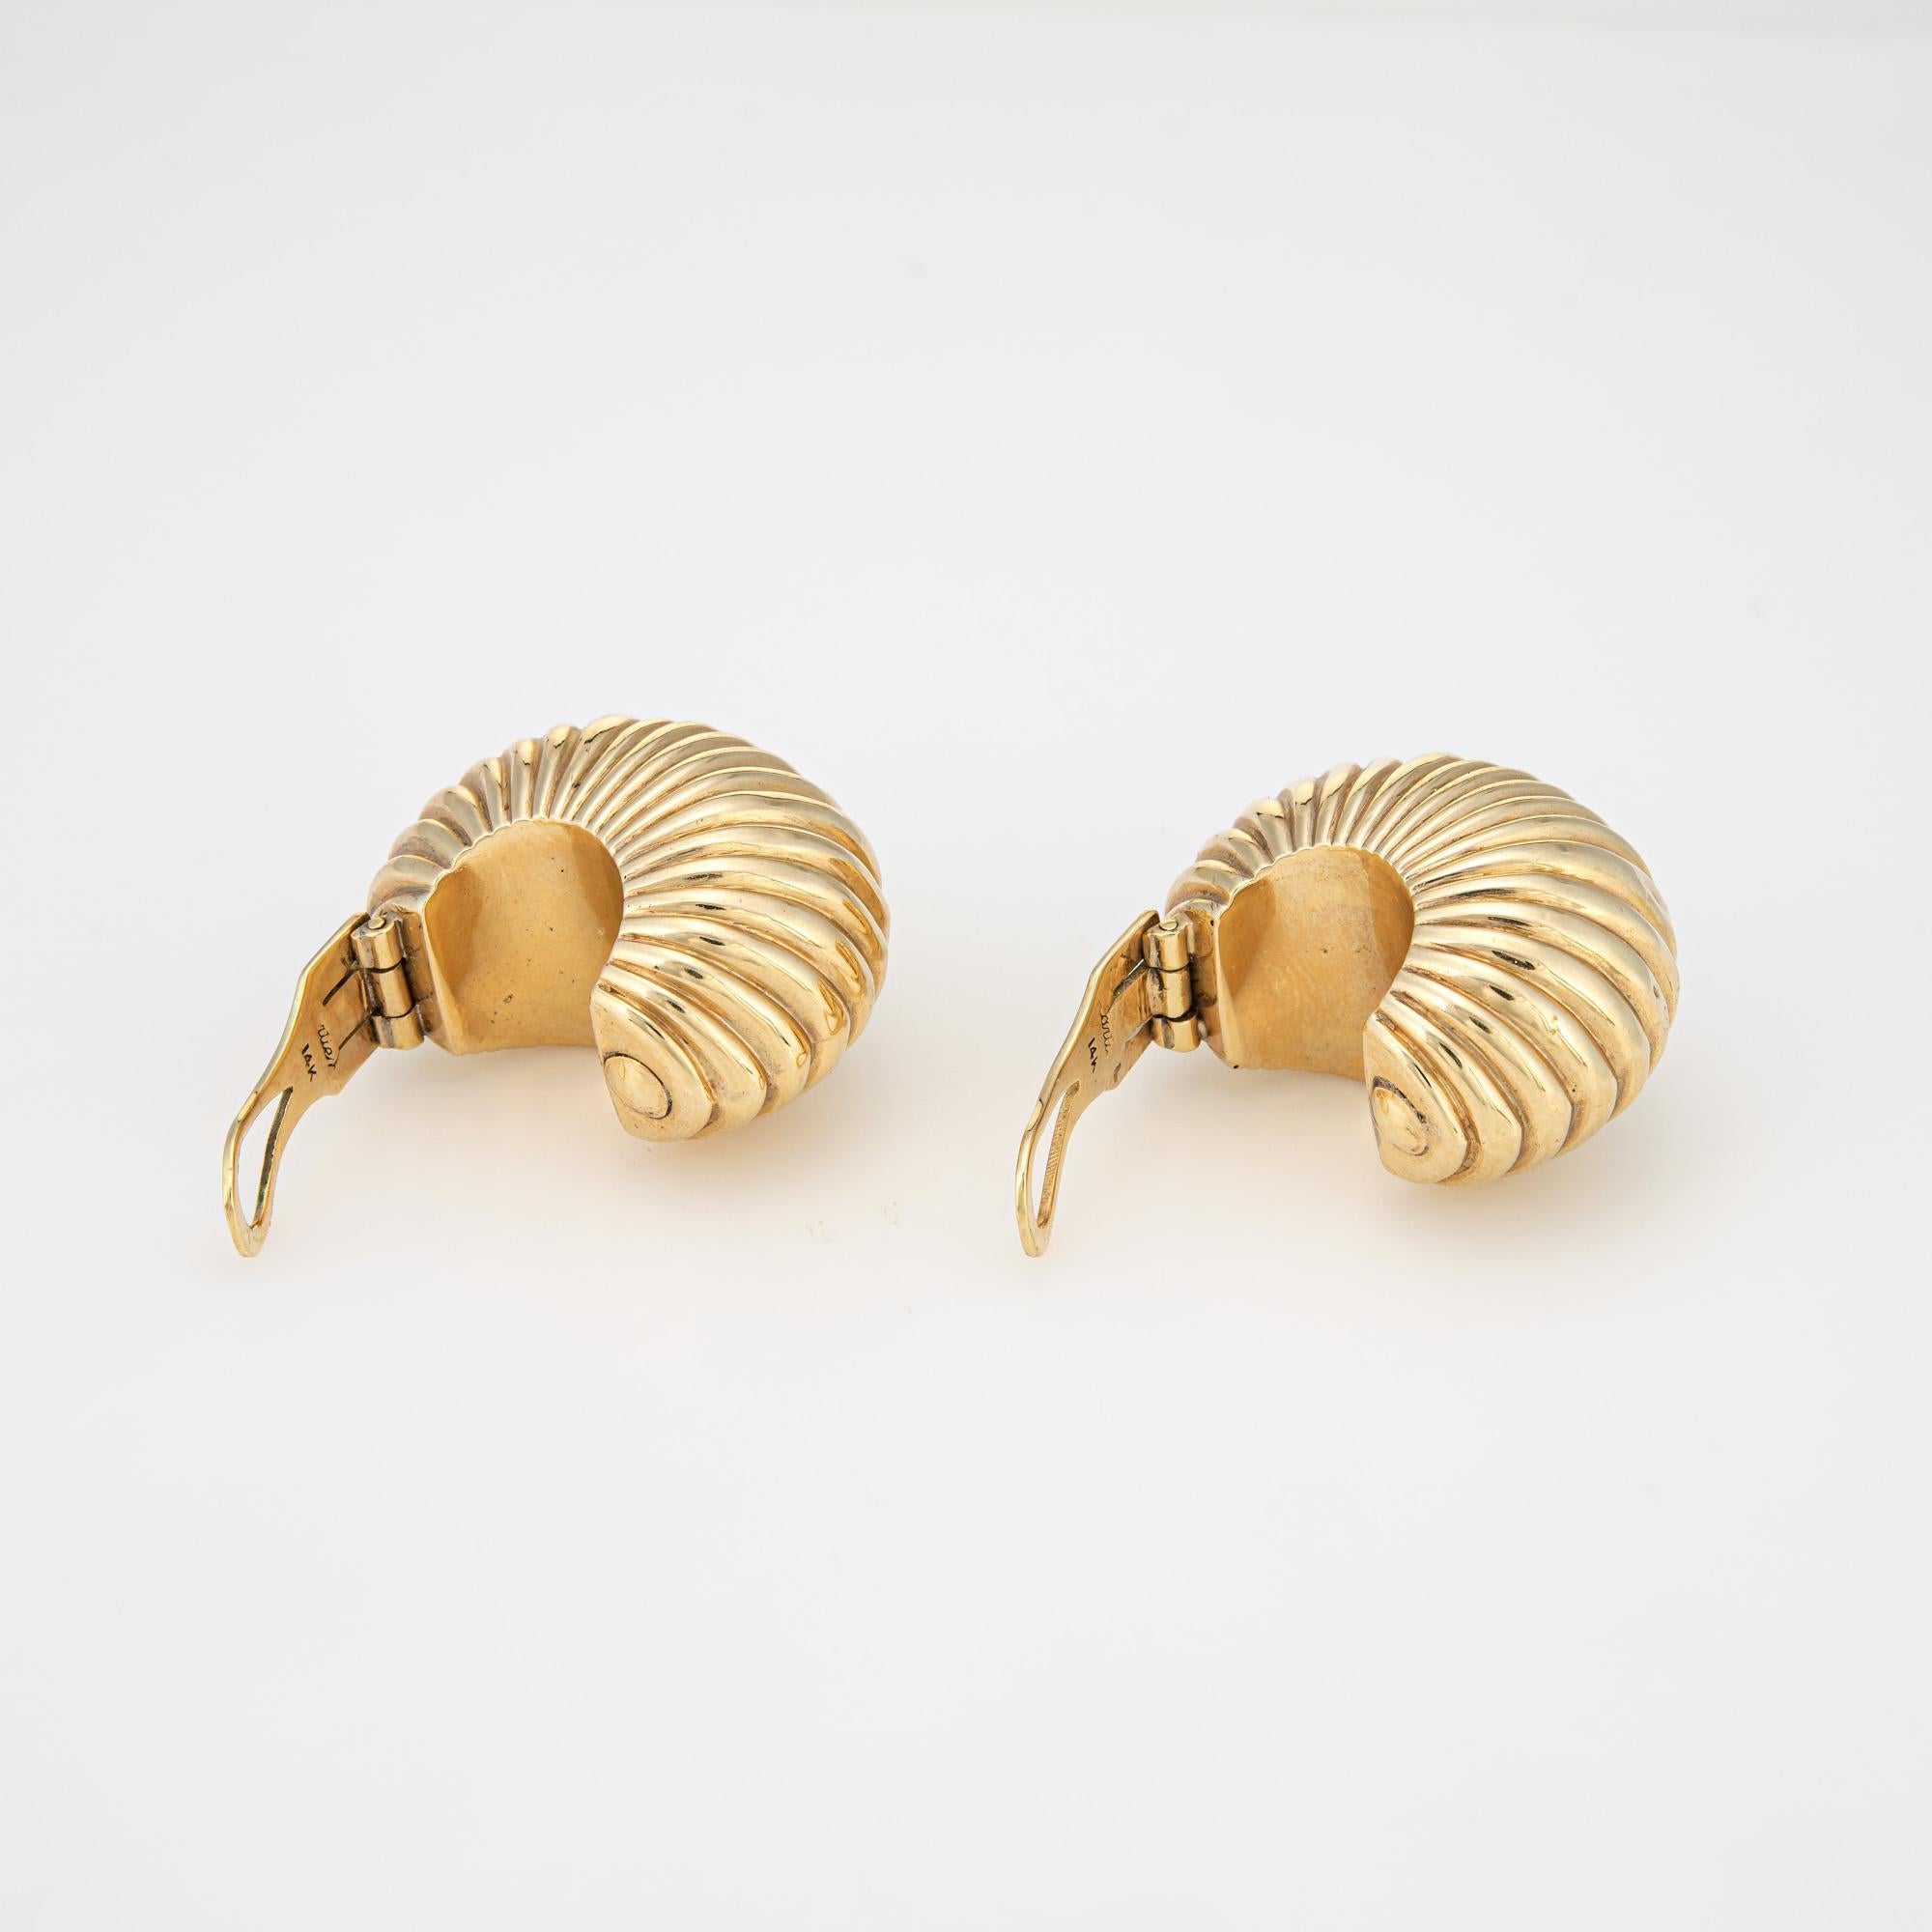 Retro Vintage Cartier Earrings c1945 Bombe Fluted Dome 14k Gold Shell Fine Jewelry For Sale